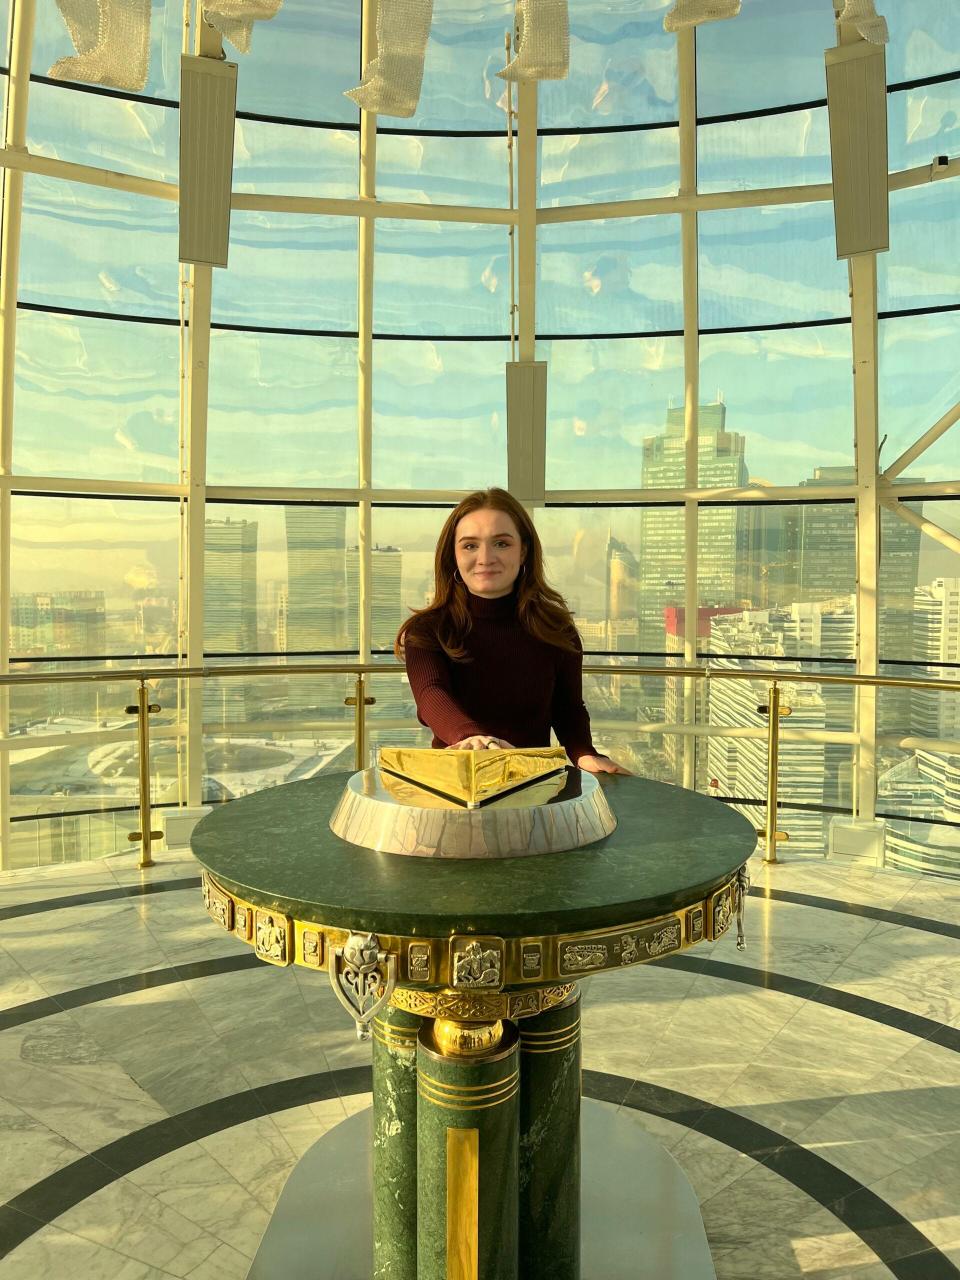 Natalie Navarette stands on top of Baiterek in Almaty, Kazakhstan. This is a symbol of Kazakhstan’s independence and Kazakhstan’s first president placed his hand on that podium which now has his handprint.